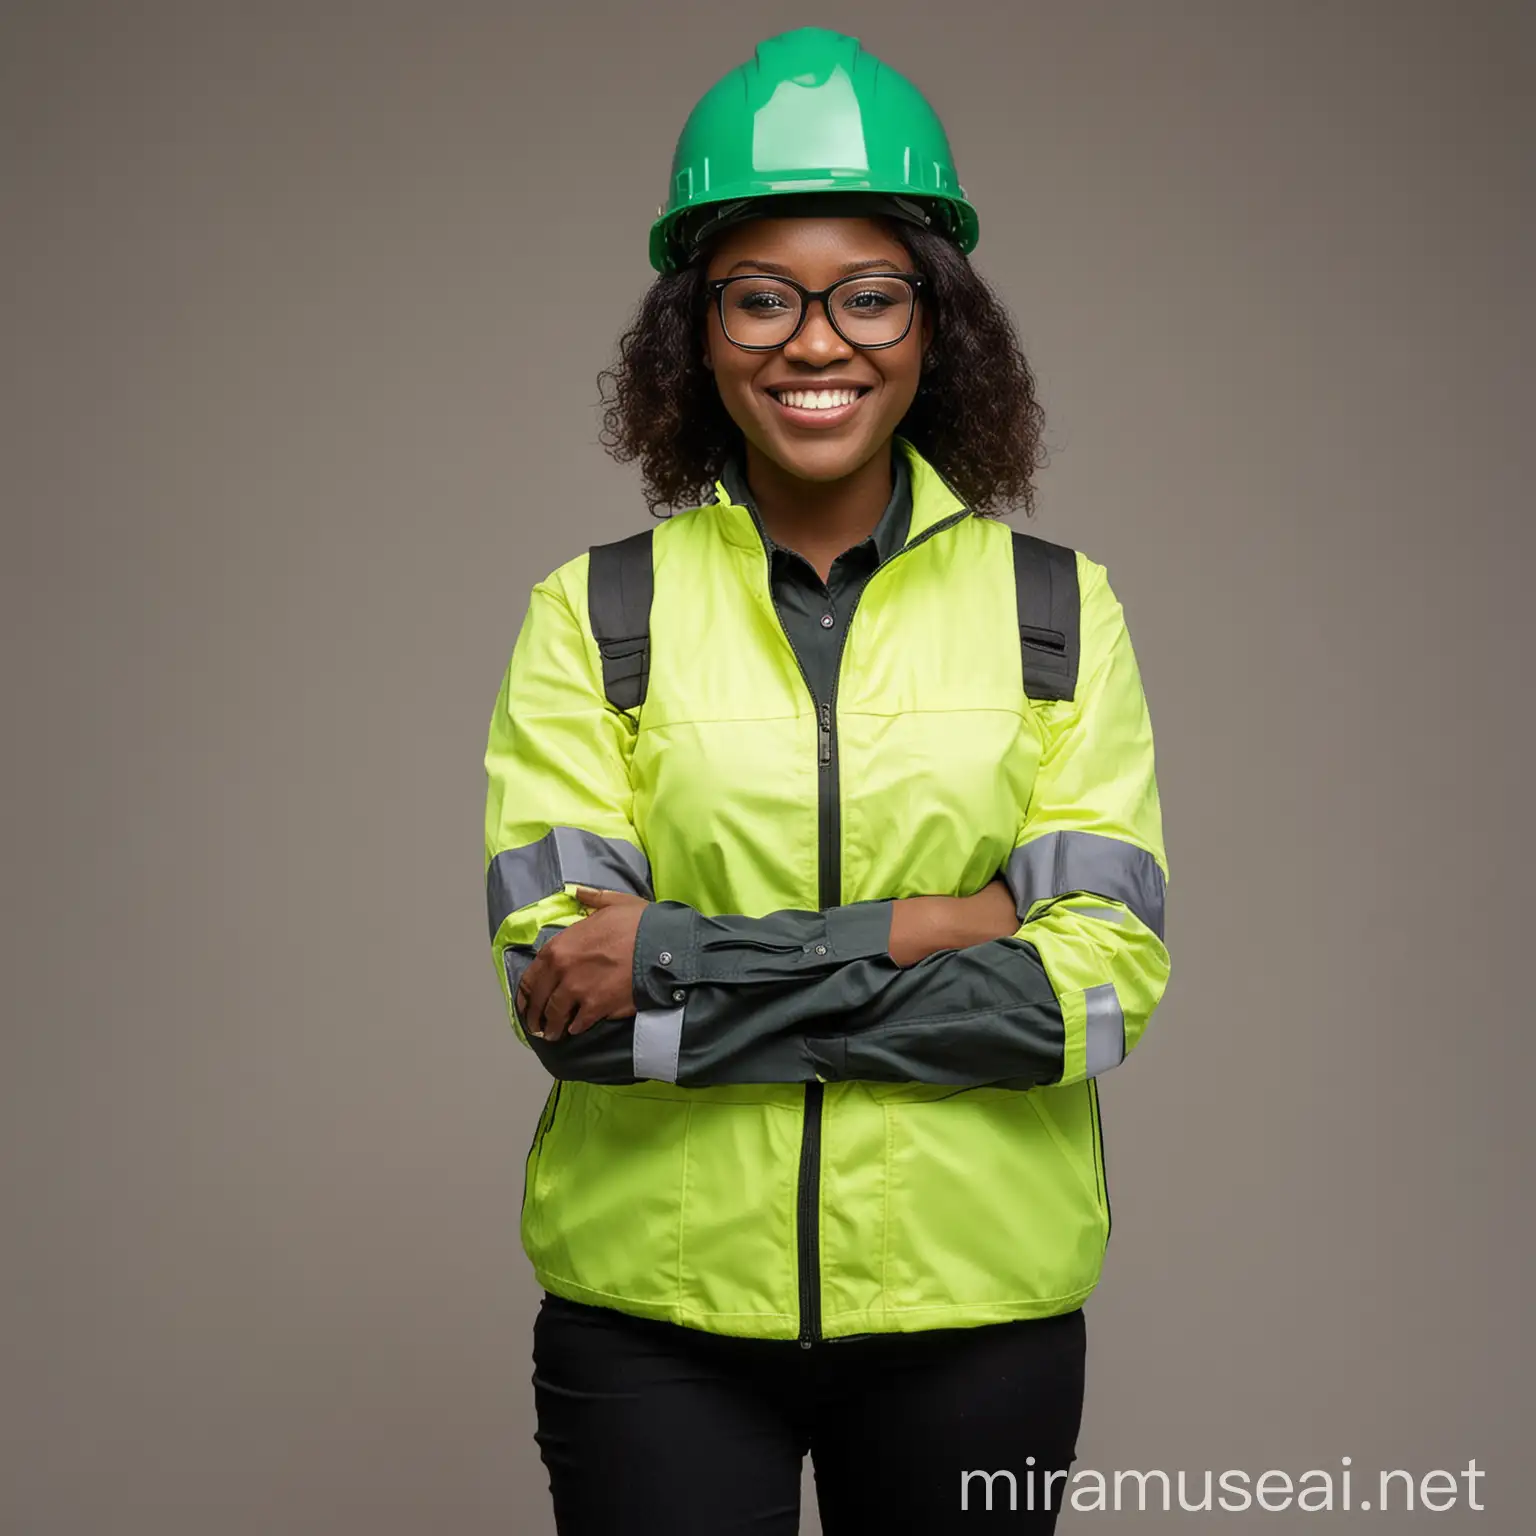 Smiling Nigerian Woman in Safety Gear